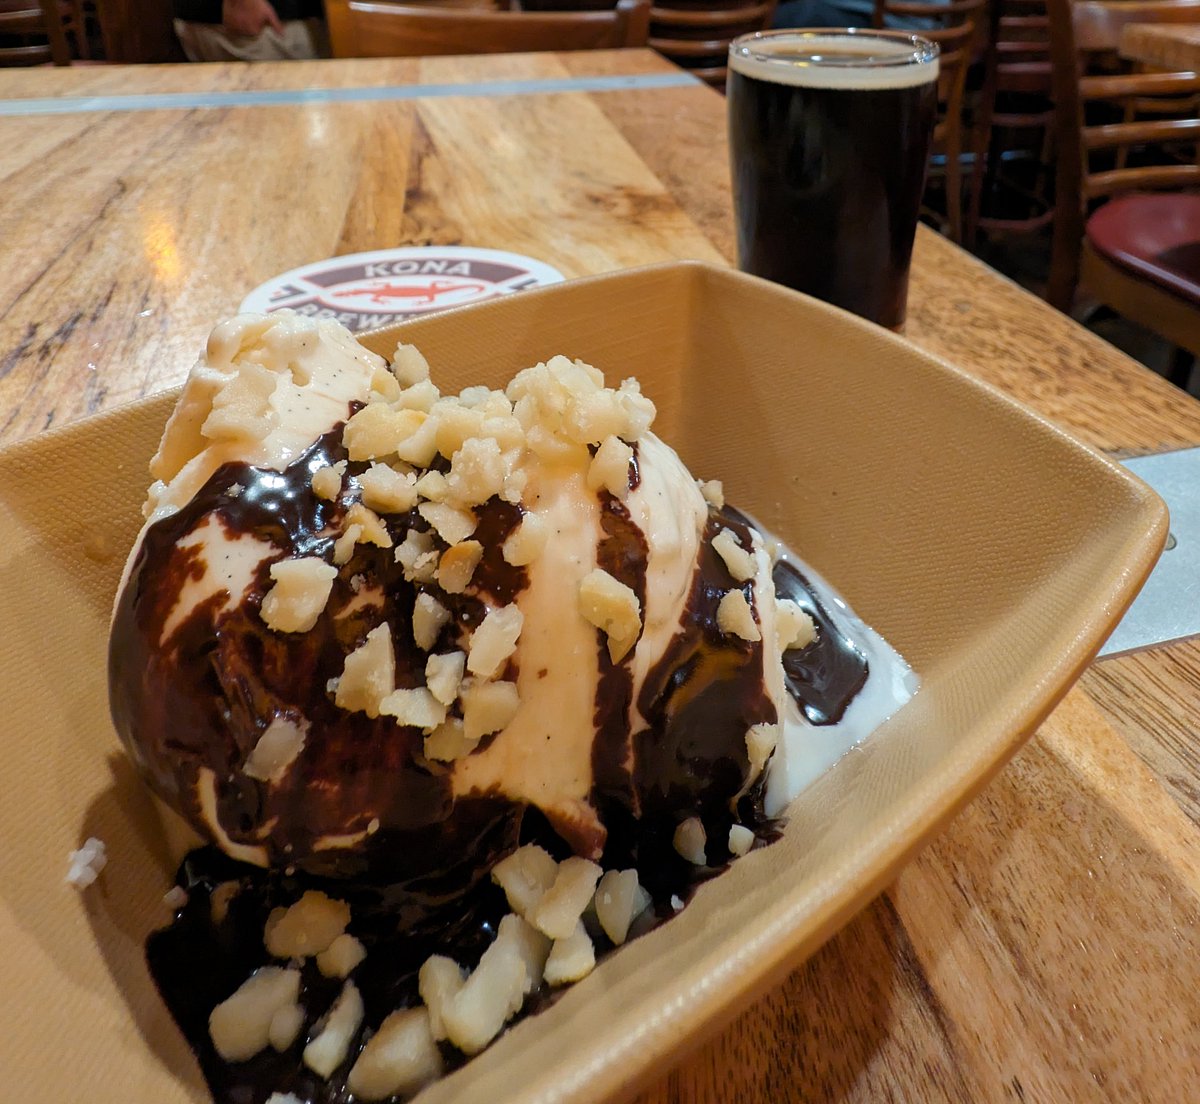 A trip to #Kona is not complete until I hit up @konabrewpub for their #HotFudgeSundae! The waiter just brought me a shooter of hot fudge sauce that is made with their #BlackSandPorter I'm telling you it's unreal yummy 🍫 🍺 🍨 #WenDoesVacay #islandlife #beer #sundae #Wanderlust